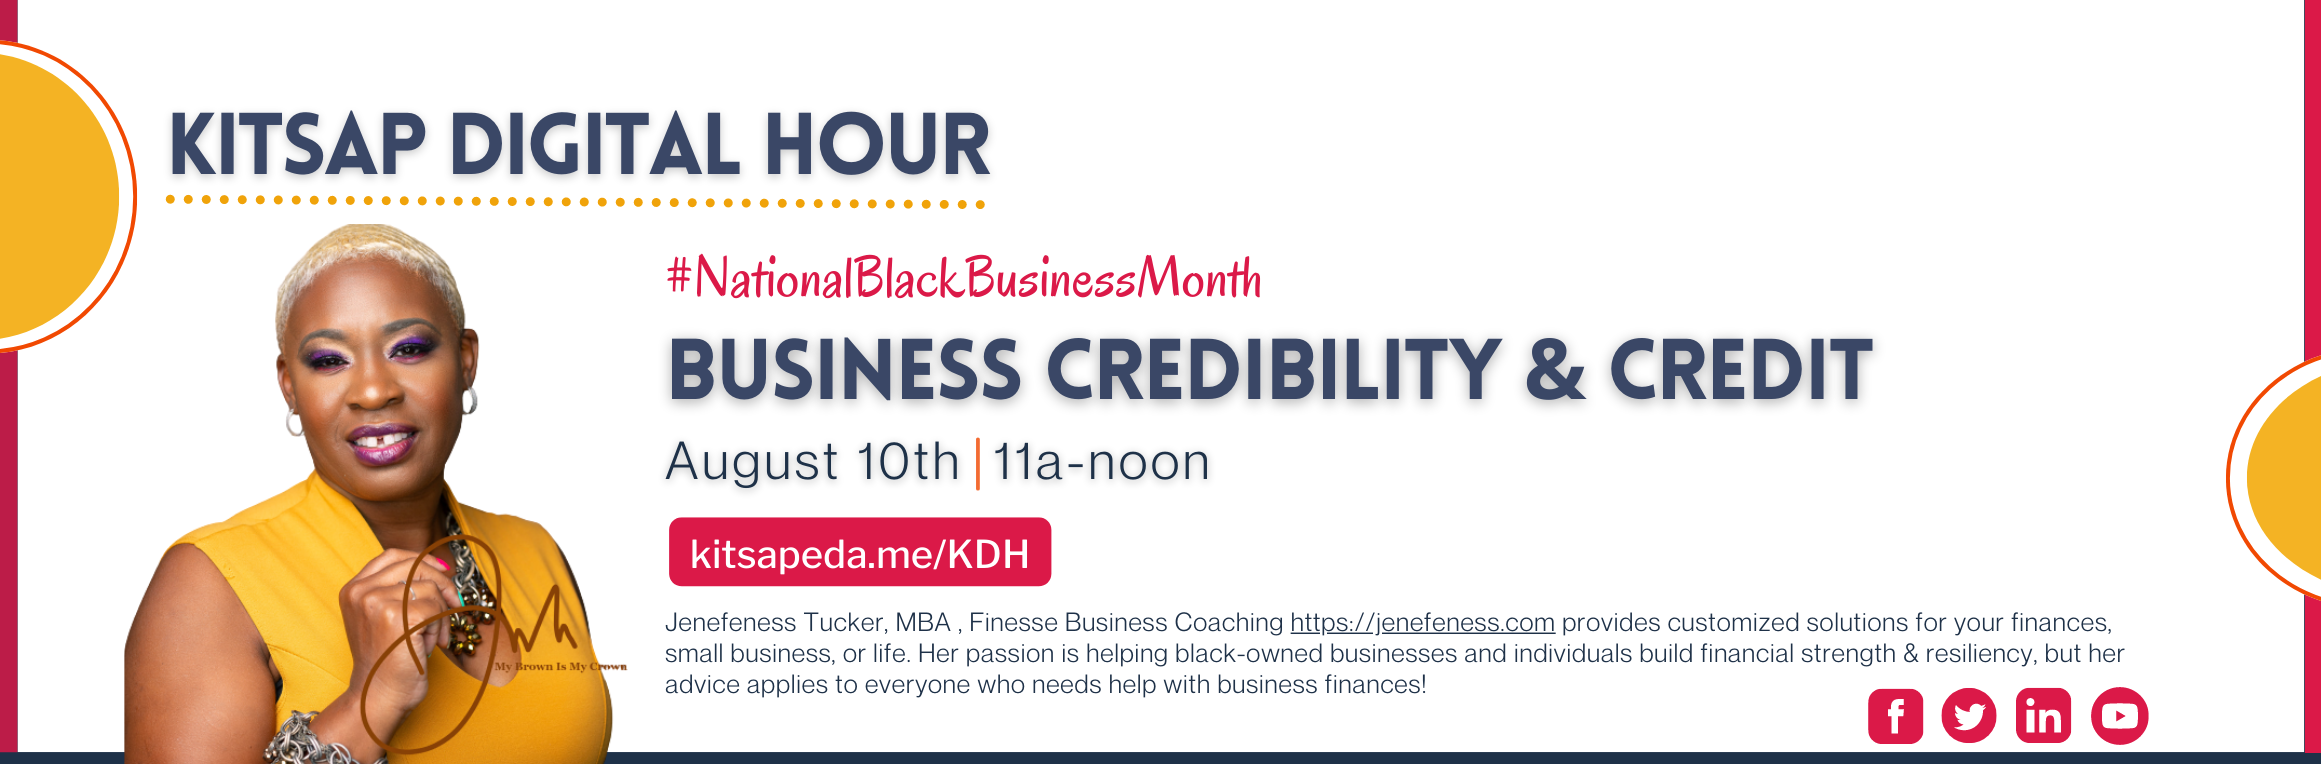 Black Business Month - Business Credit